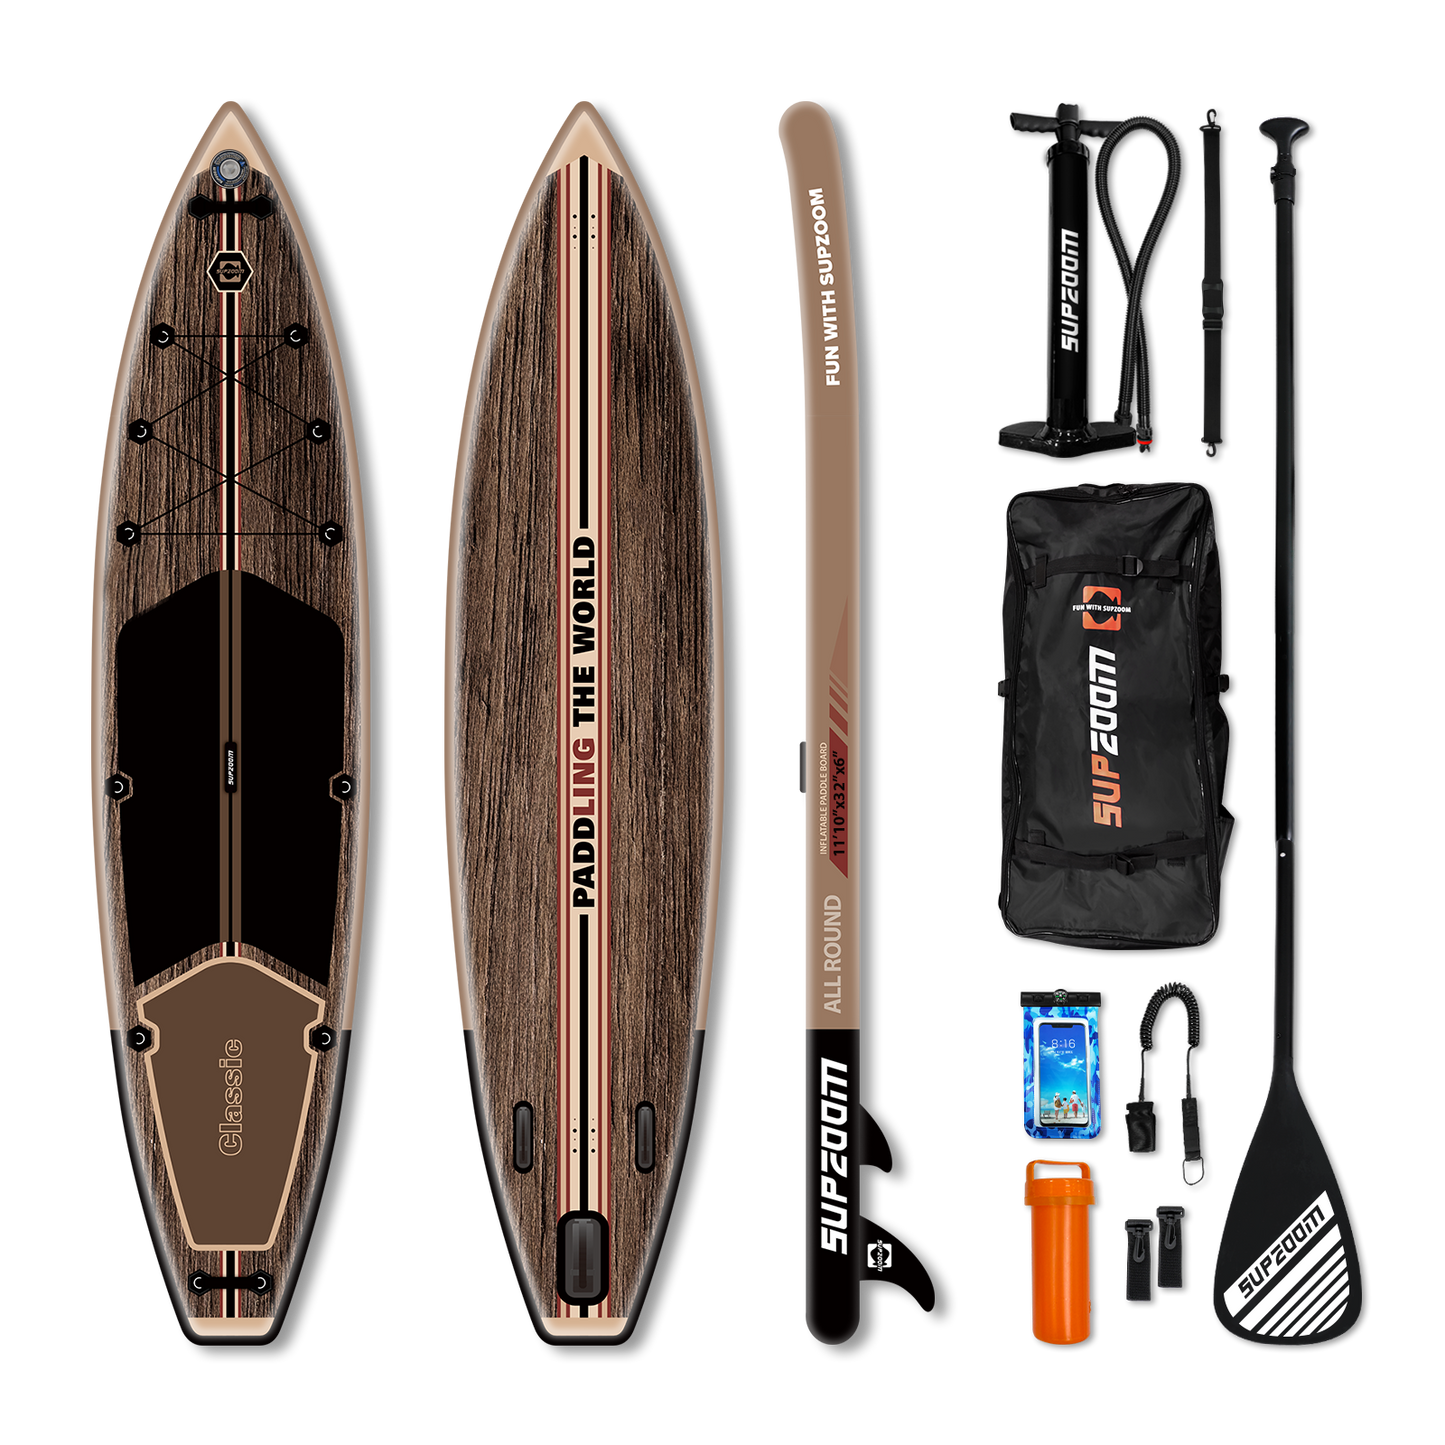 All around 11'10'' inflatable stand up paddle board | Supzoom classic wood grain style